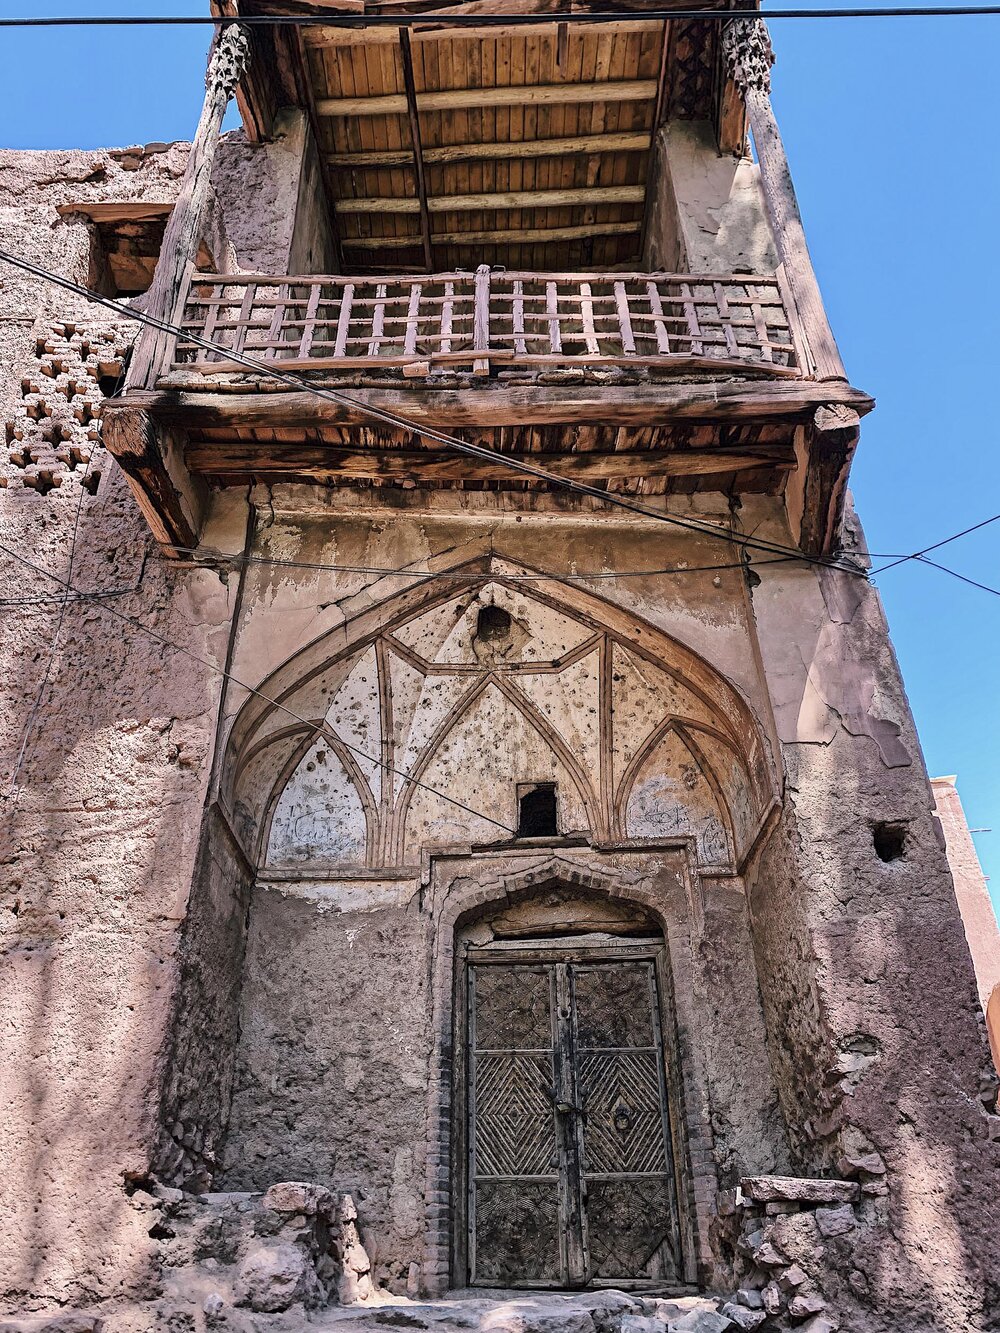 Historical building in Abyaneh, Iran